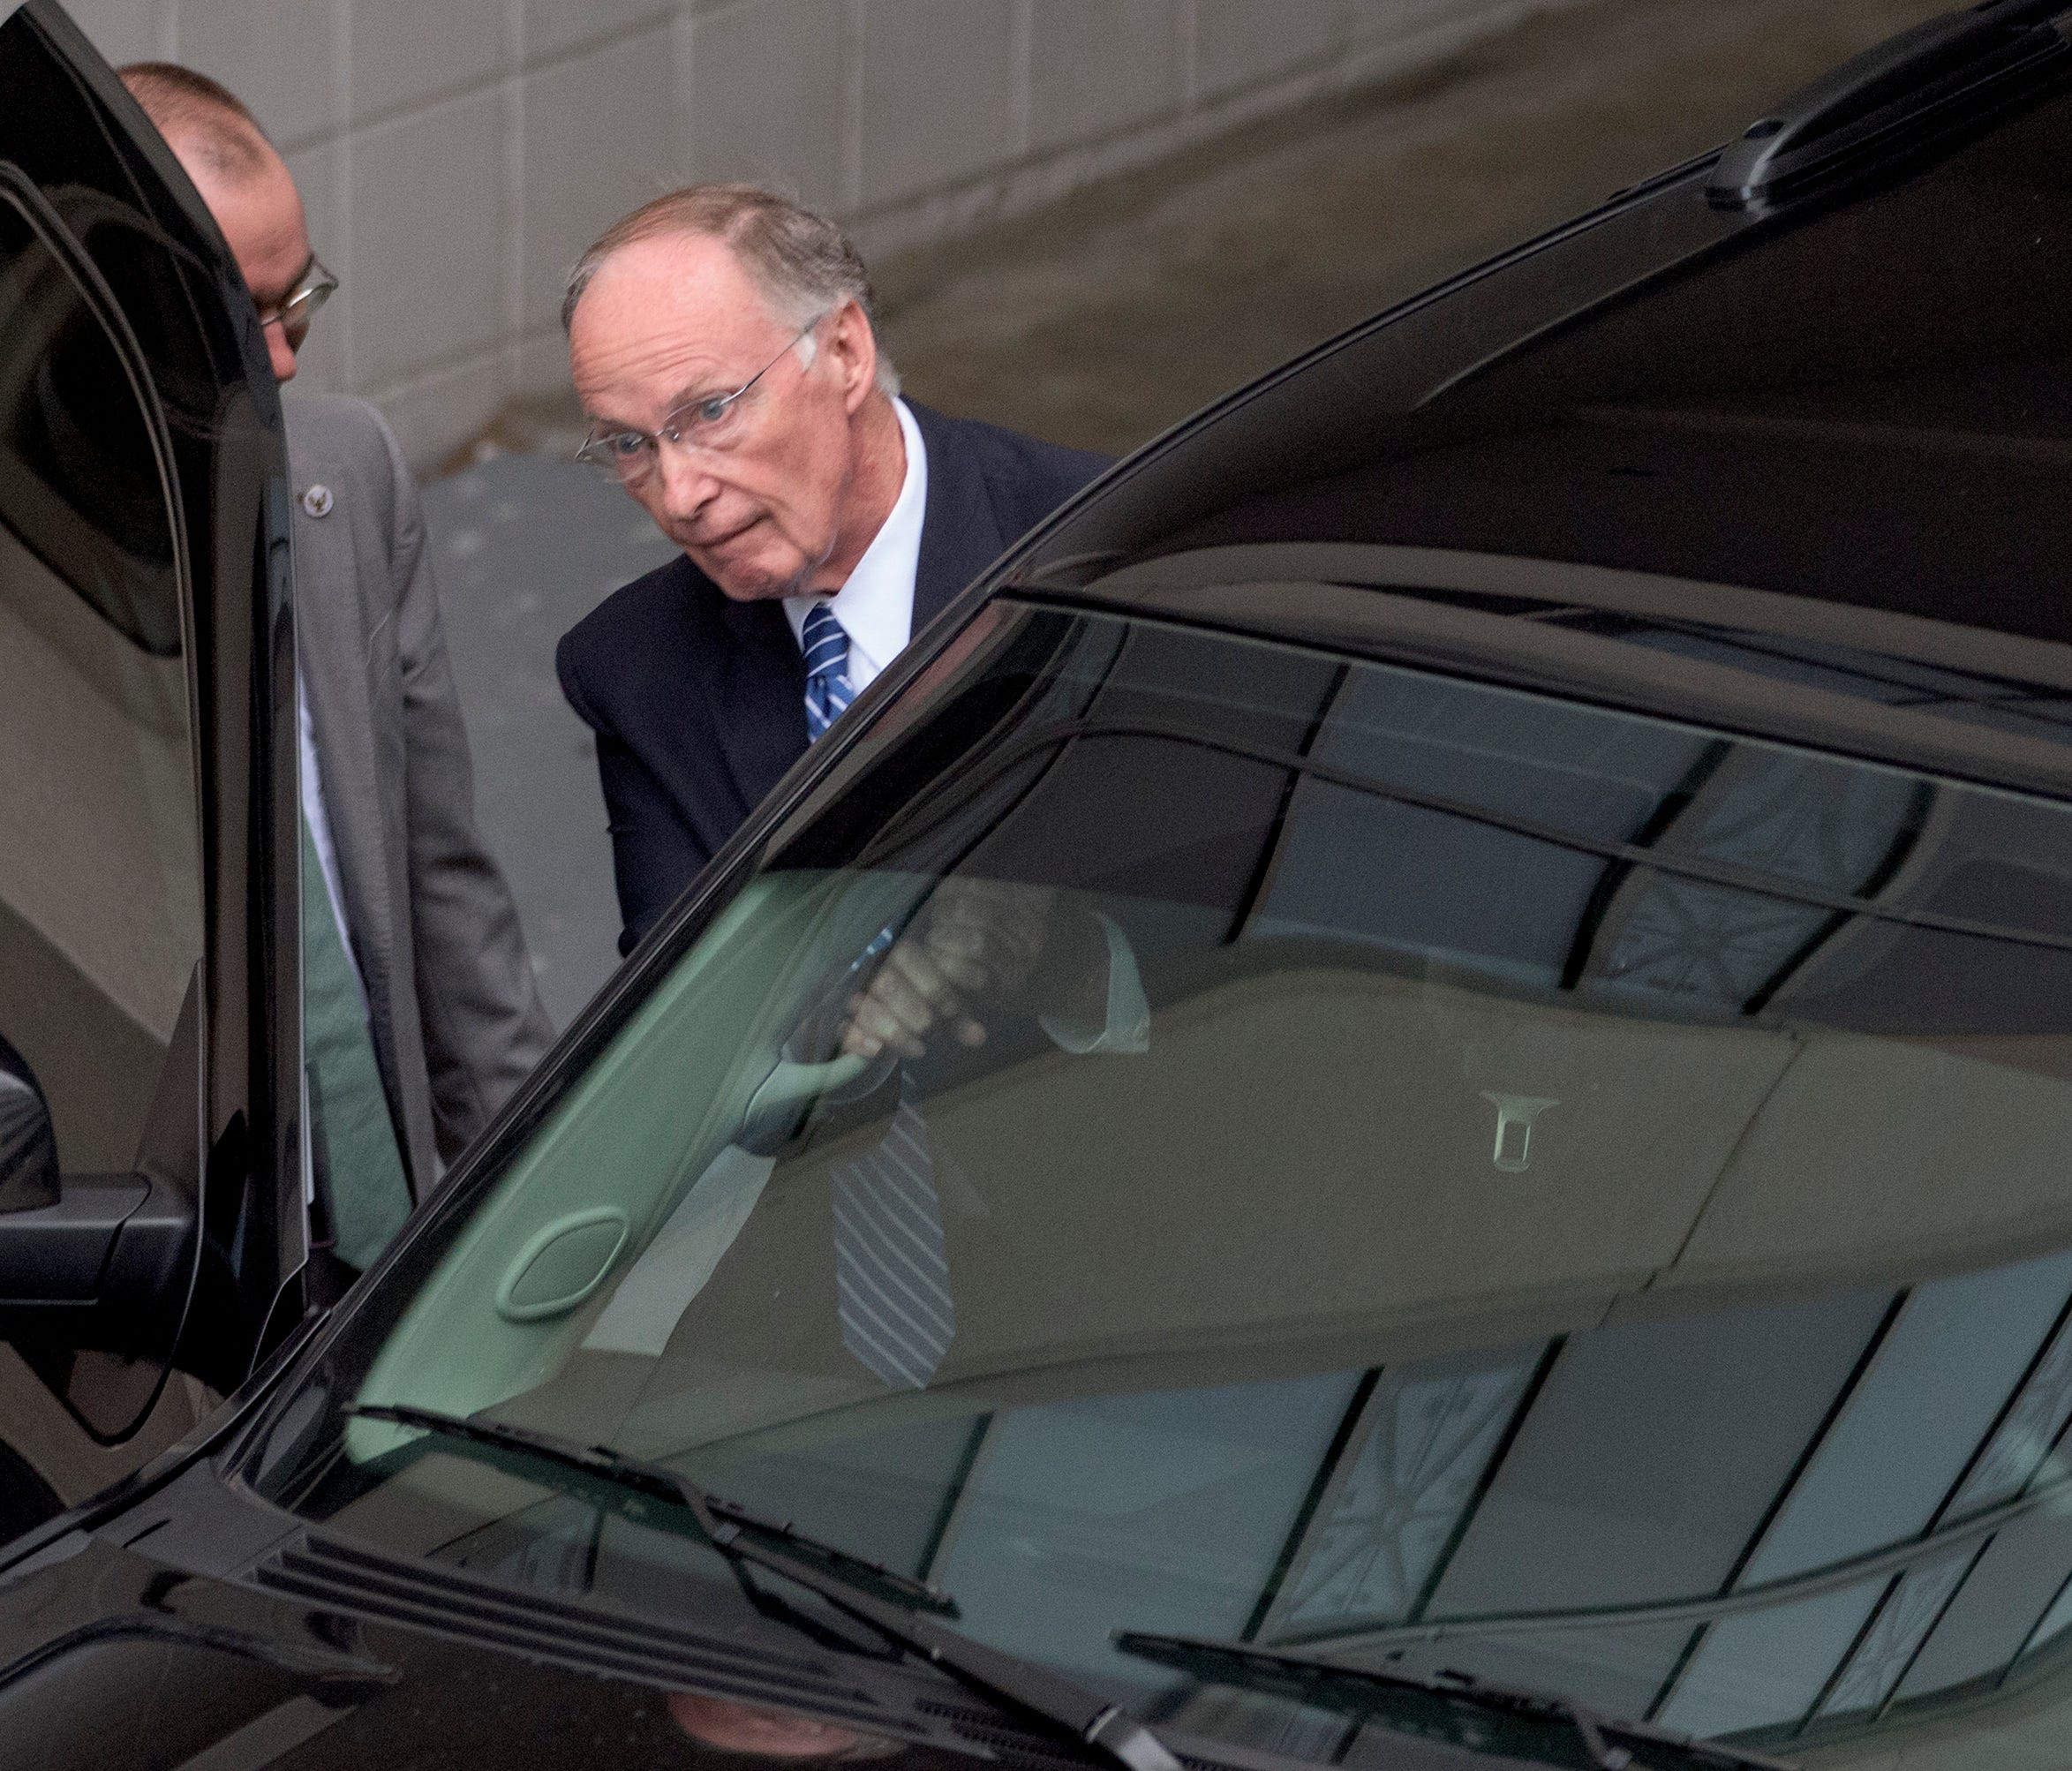 Alabama Governor Robert Bentley exits out of the back of the RSA Union Building in Montgomery, Ala., on Wednesday April 5, 2017 as the Alabama Ethics Commission meets in executive session looking into allegations against him.